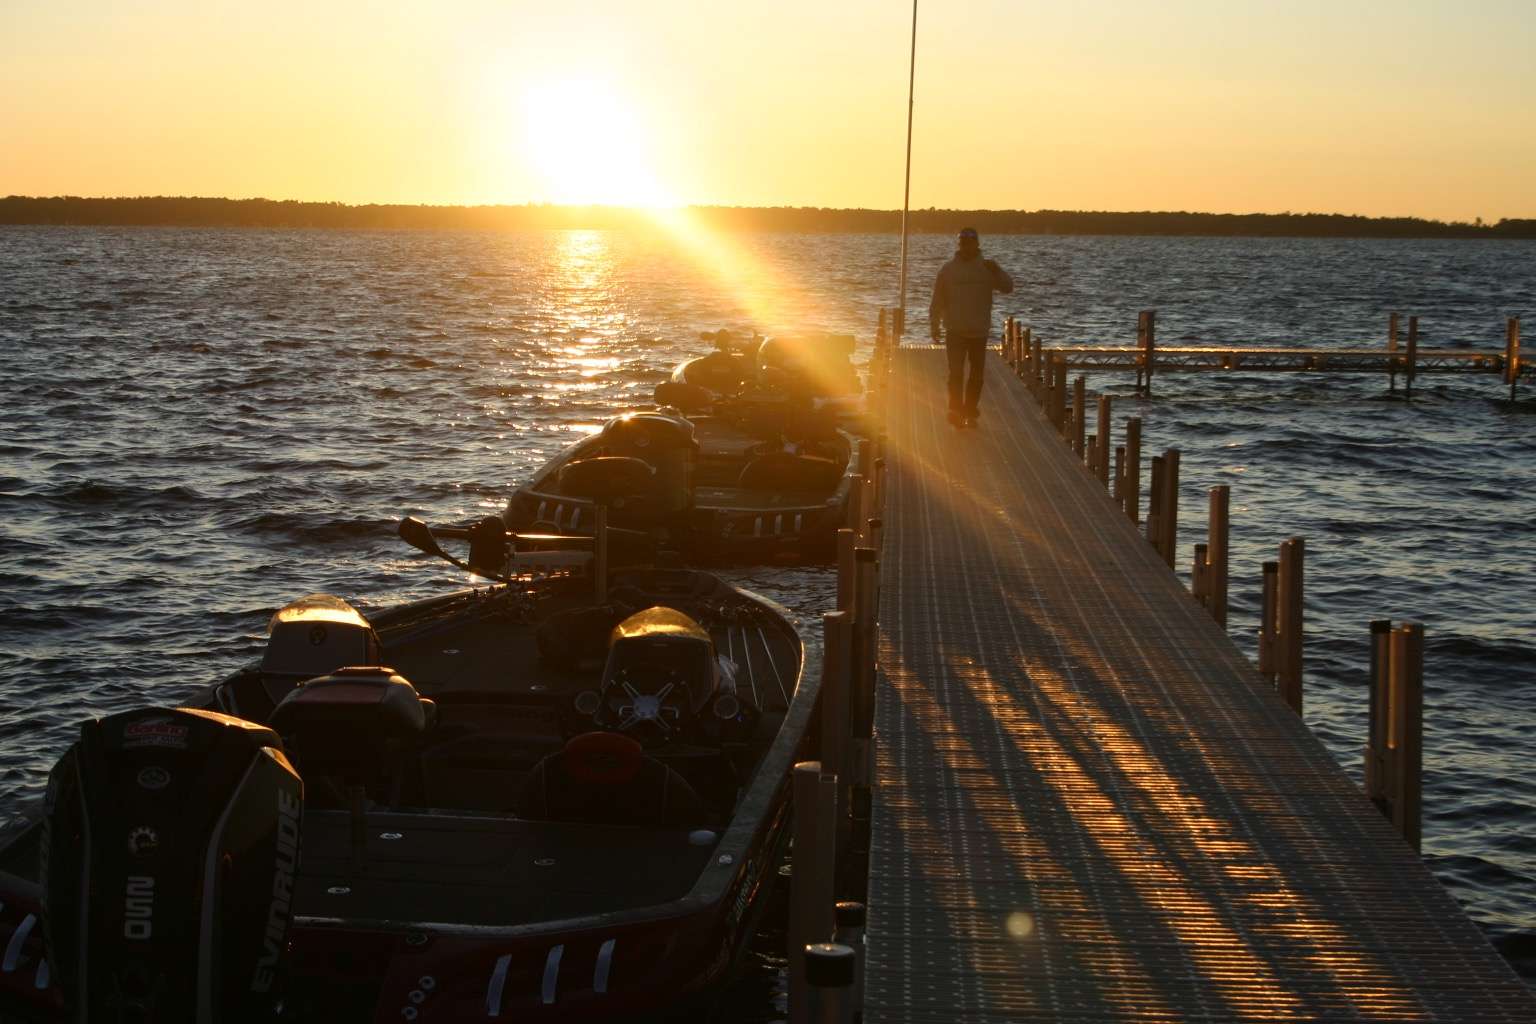 As the sun rose over Gull Lake, Evers made sure everything was set to go.